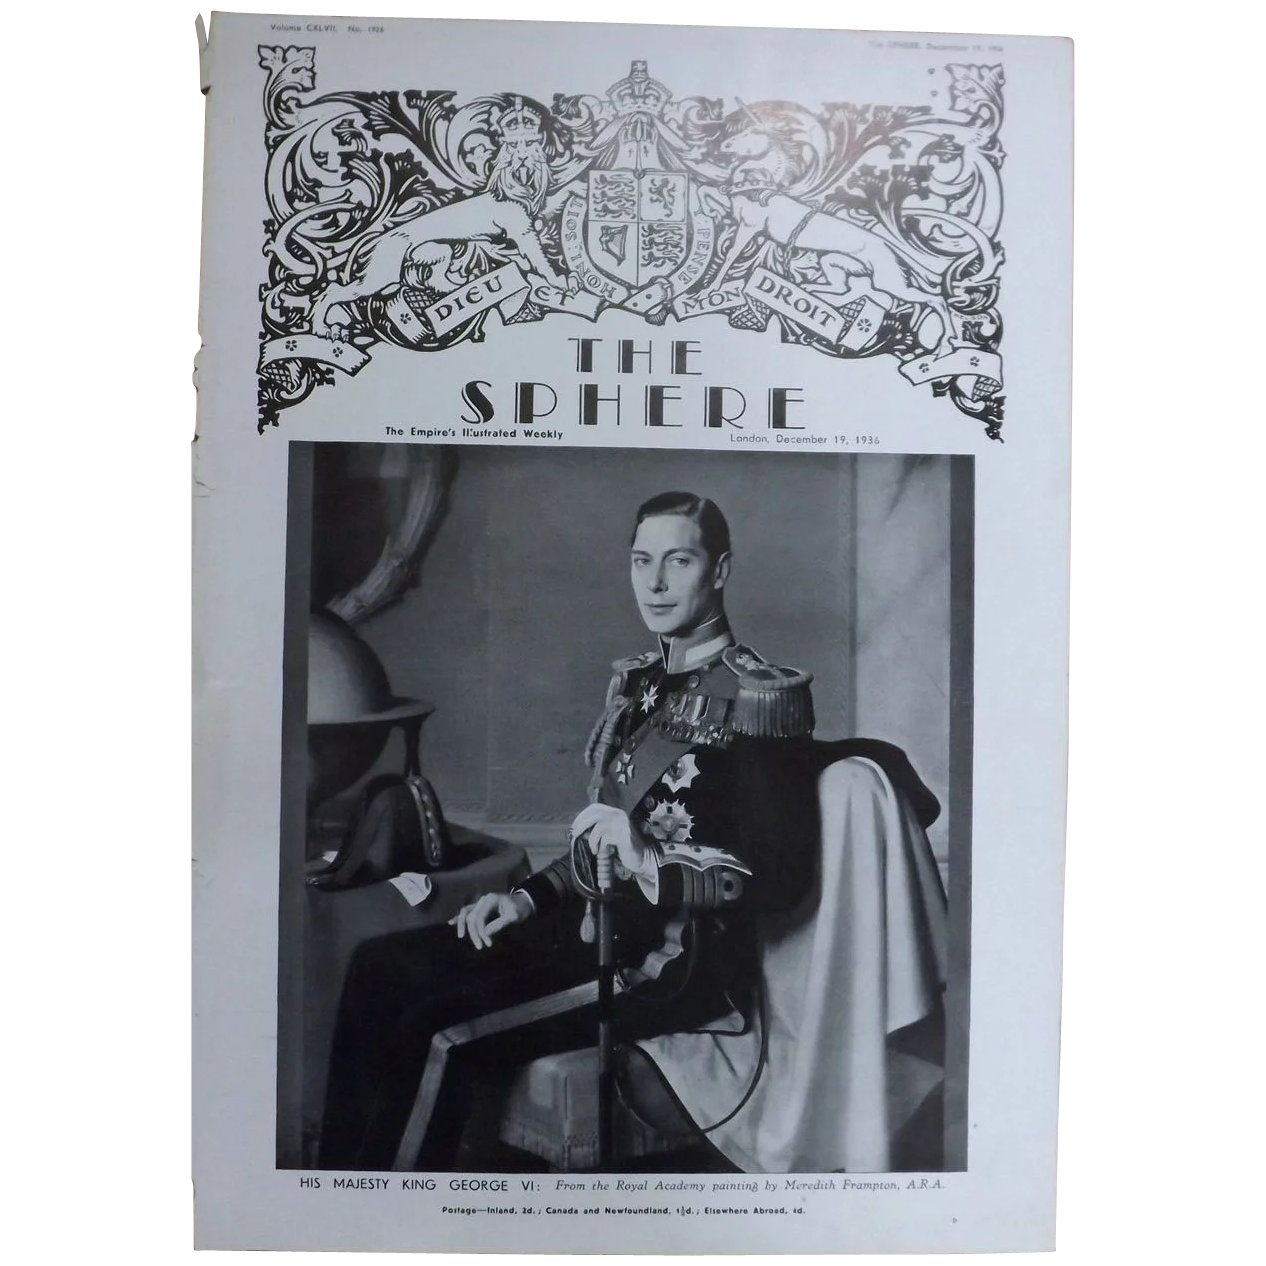 SPECIAL Feature. Abdication Edward VIII & Crowning of George VI -The Sphere 1936